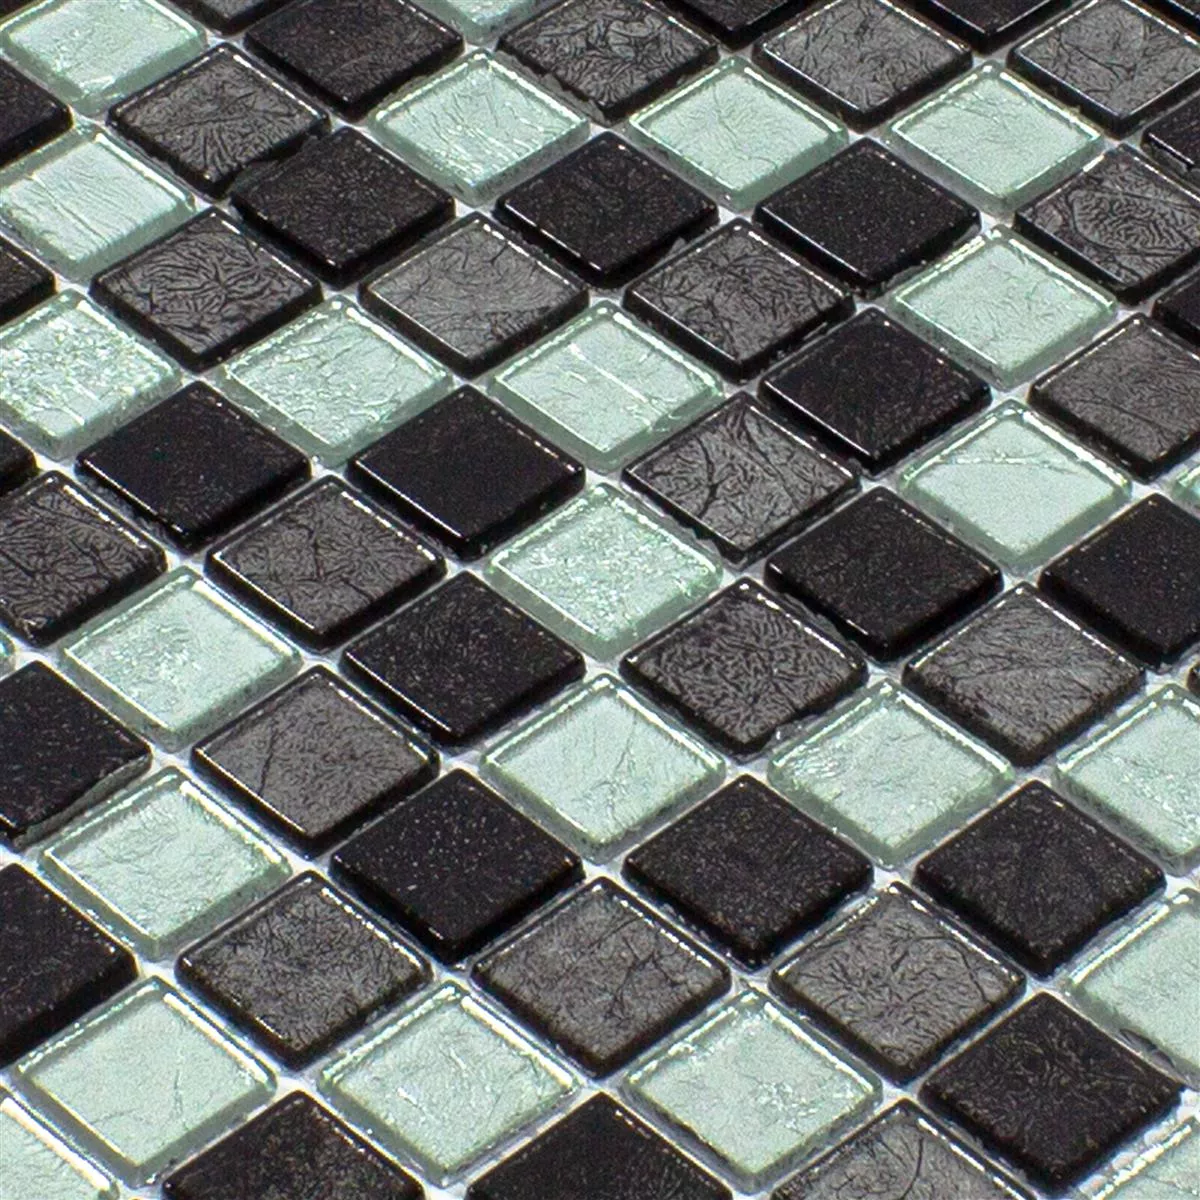 Mosaic Tiles Glass Bonnie Crystal Structure Black Silver Grey